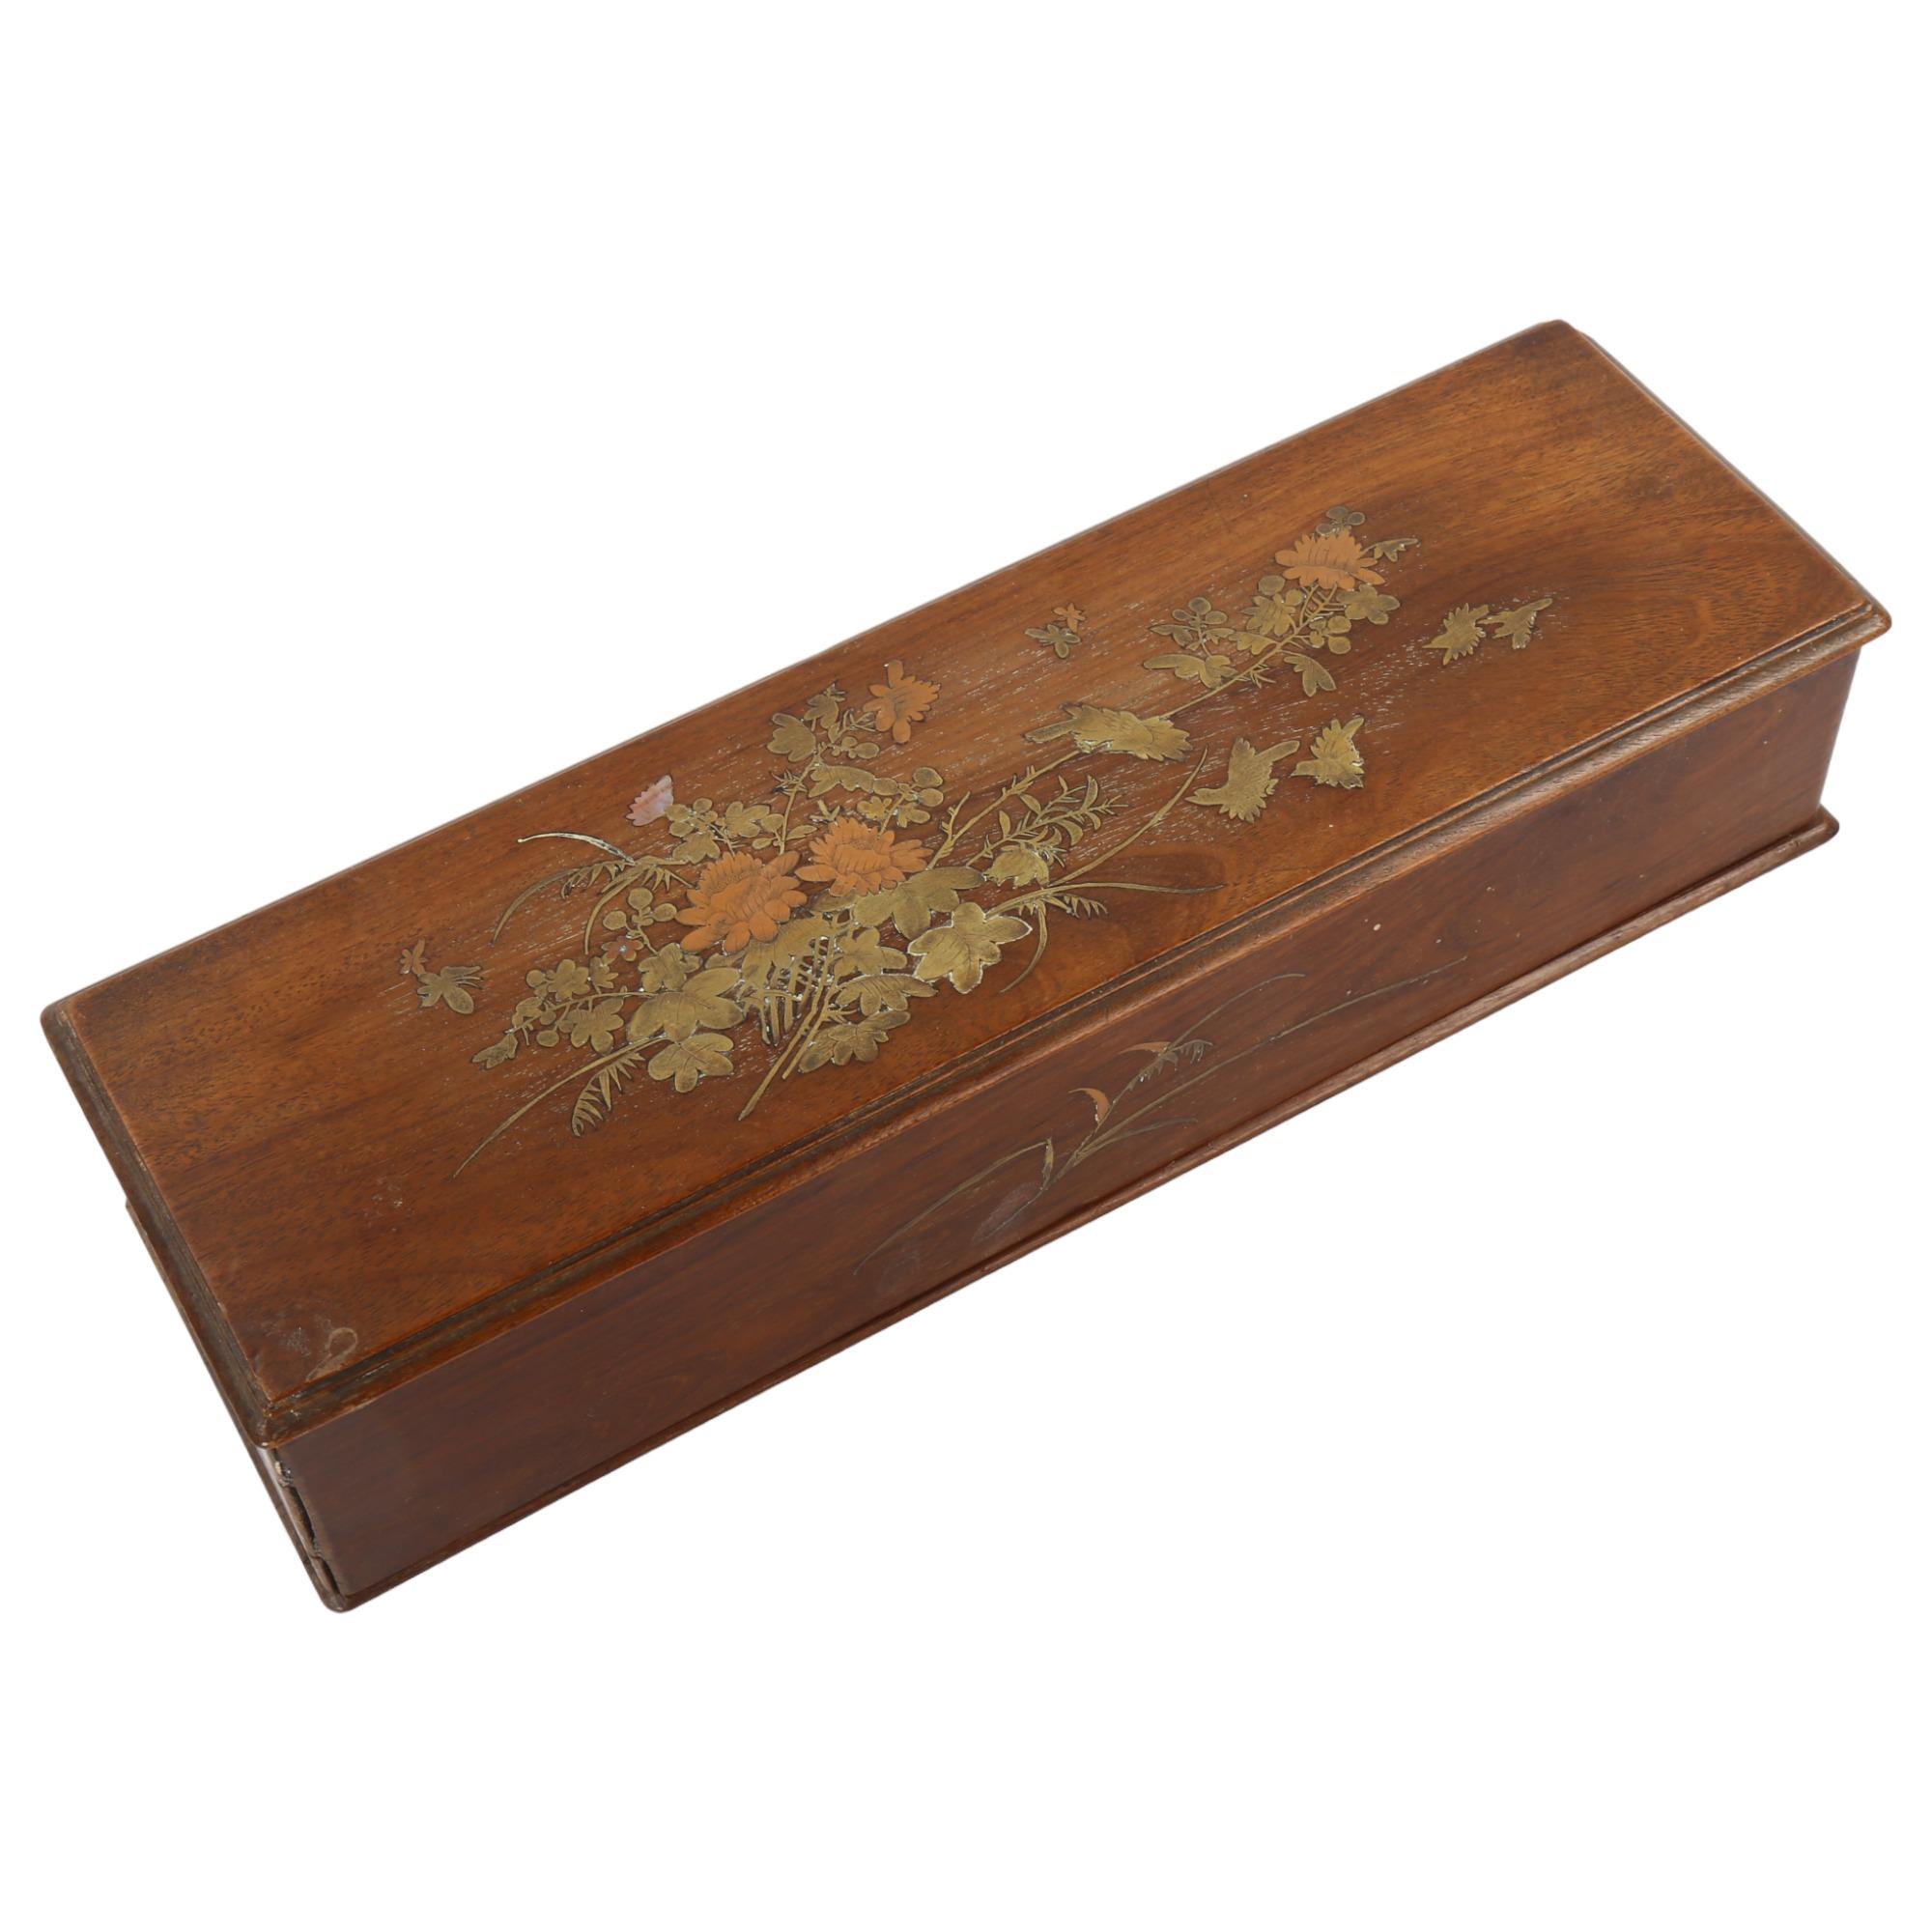 A Japanese Meiji Period hardwood box, with inlaid copper brass and mother-of-pearl decoration, 36